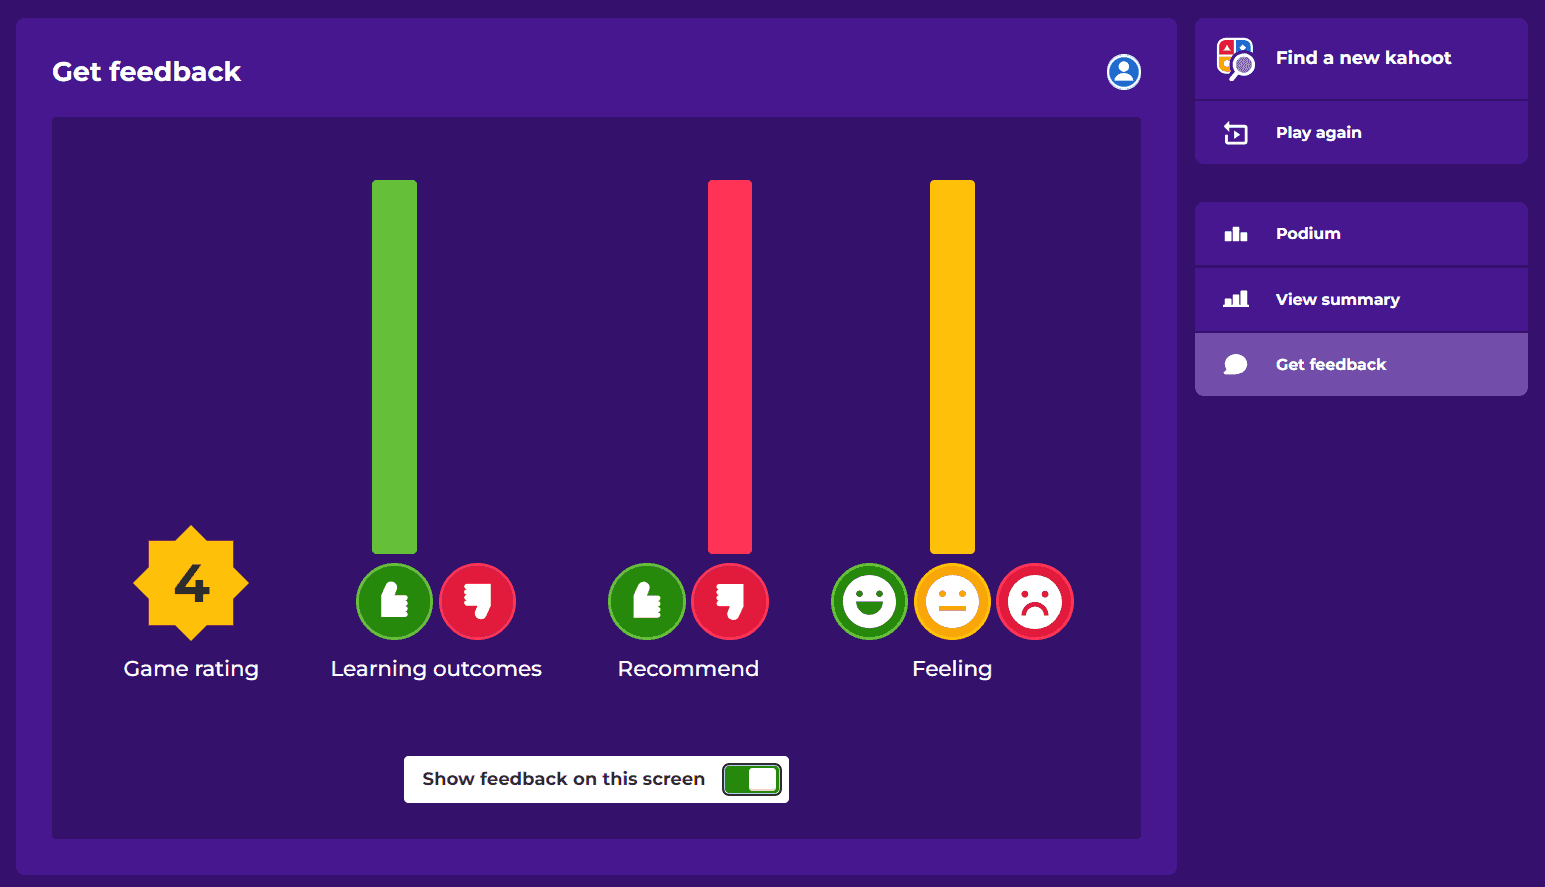 Kahoot's feedback screen appears at the end of the session, gives the presenter an overall rating, and shows how users rated them in three categories: Learning outcomes, Recommend, and Feeling.